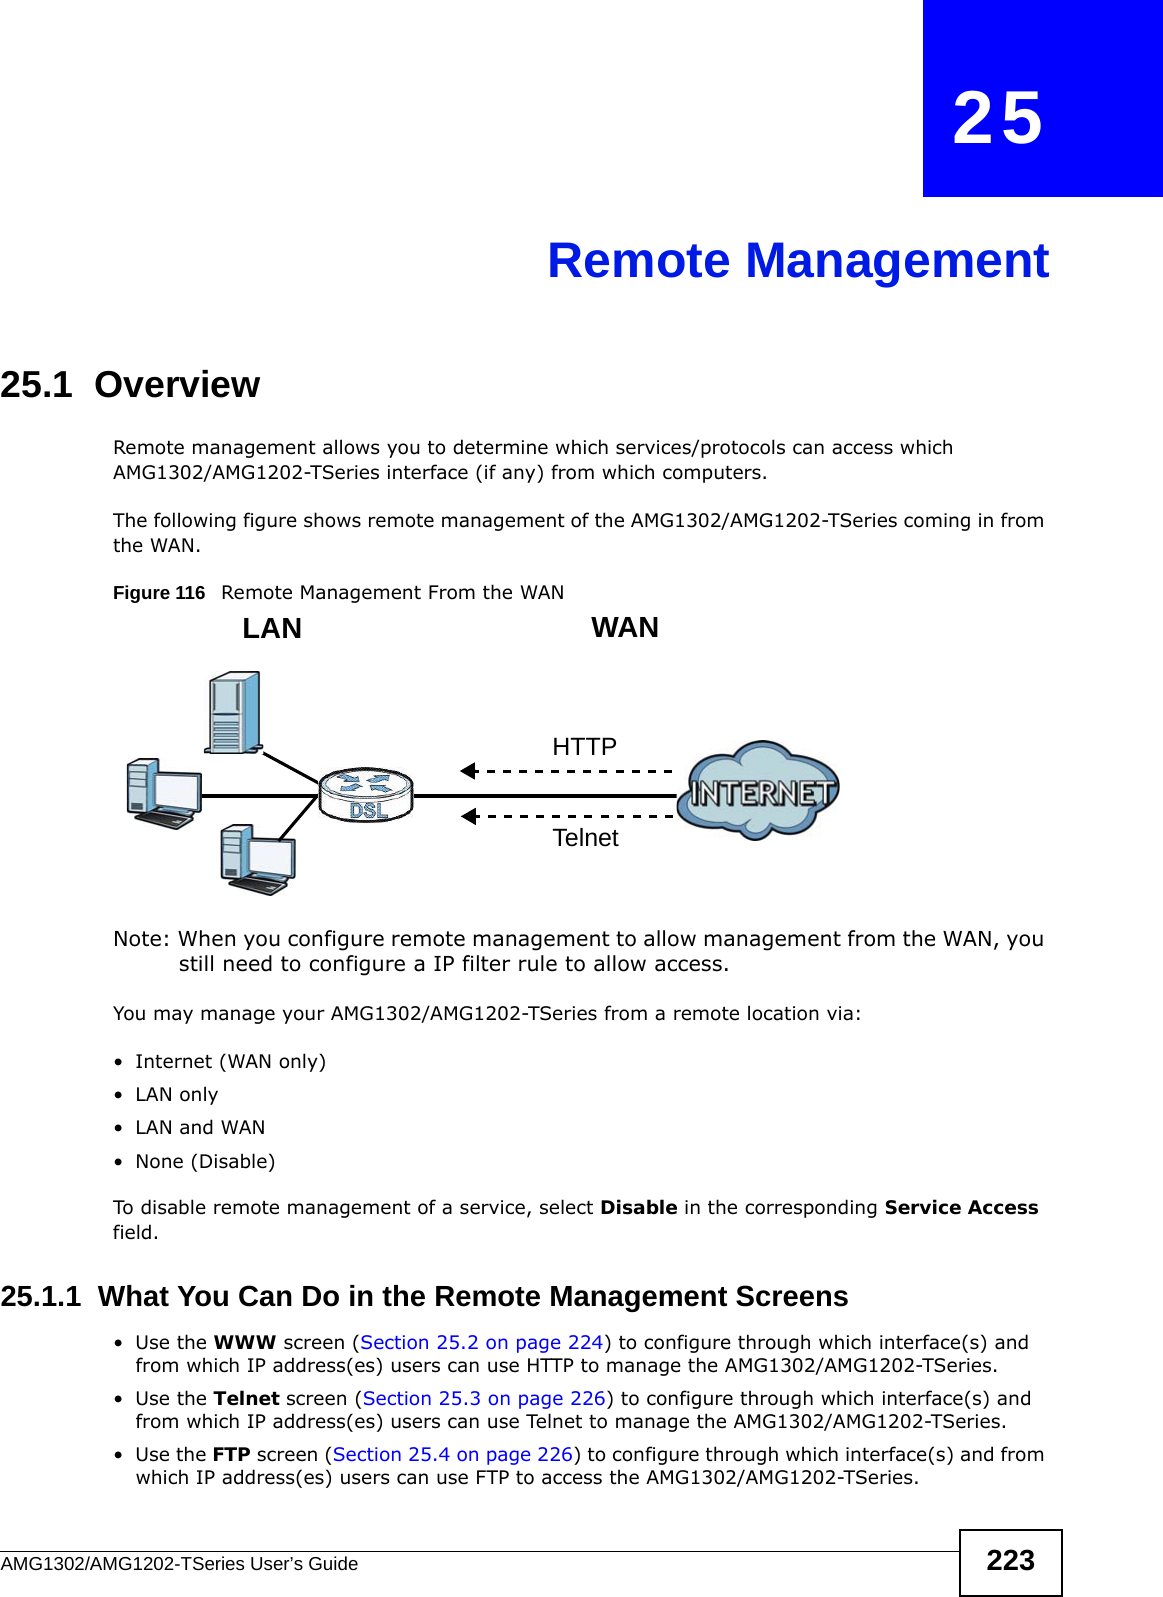 AMG1302/AMG1202-TSeries User’s Guide 223CHAPTER   25Remote Management25.1  OverviewRemote management allows you to determine which services/protocols can access which AMG1302/AMG1202-TSeries interface (if any) from which computers.The following figure shows remote management of the AMG1302/AMG1202-TSeries coming in from the WAN.Figure 116   Remote Management From the WANNote: When you configure remote management to allow management from the WAN, you still need to configure a IP filter rule to allow access.You may manage your AMG1302/AMG1202-TSeries from a remote location via:• Internet (WAN only)•LAN only•LAN and WAN• None (Disable)To disable remote management of a service, select Disable in the corresponding Service Access field.25.1.1  What You Can Do in the Remote Management Screens•Use the WWW screen (Section 25.2 on page 224) to configure through which interface(s) and from which IP address(es) users can use HTTP to manage the AMG1302/AMG1202-TSeries.•Use the Telnet screen (Section 25.3 on page 226) to configure through which interface(s) and from which IP address(es) users can use Telnet to manage the AMG1302/AMG1202-TSeries.•Use the FTP screen (Section 25.4 on page 226) to configure through which interface(s) and from which IP address(es) users can use FTP to access the AMG1302/AMG1202-TSeries.LAN WANHTTPTelnet